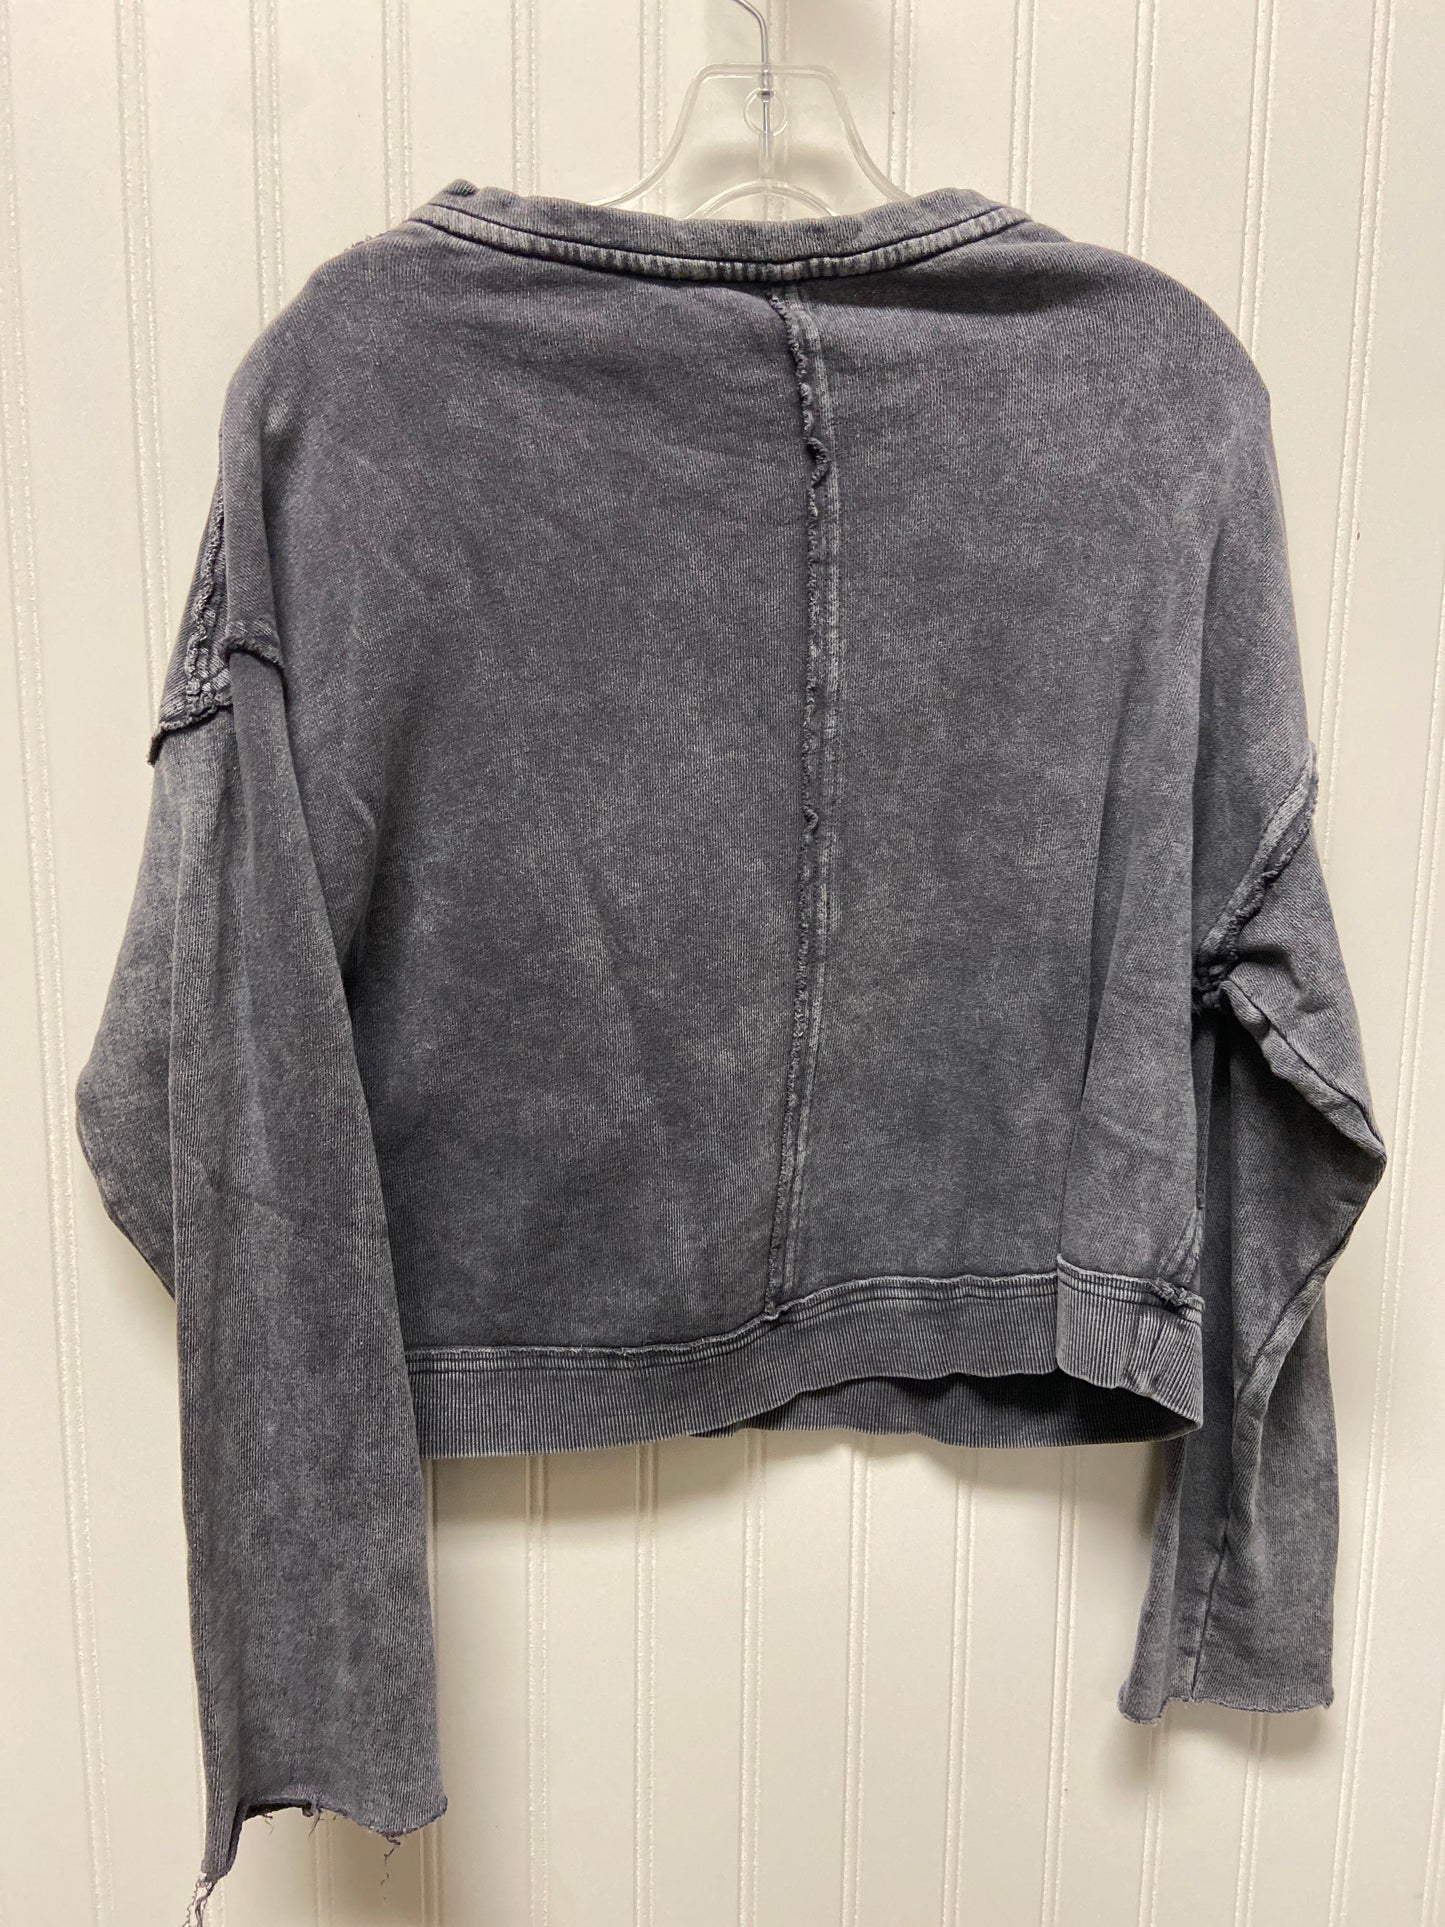 Charcoal Top Long Sleeve Free People, Size Petite   Small